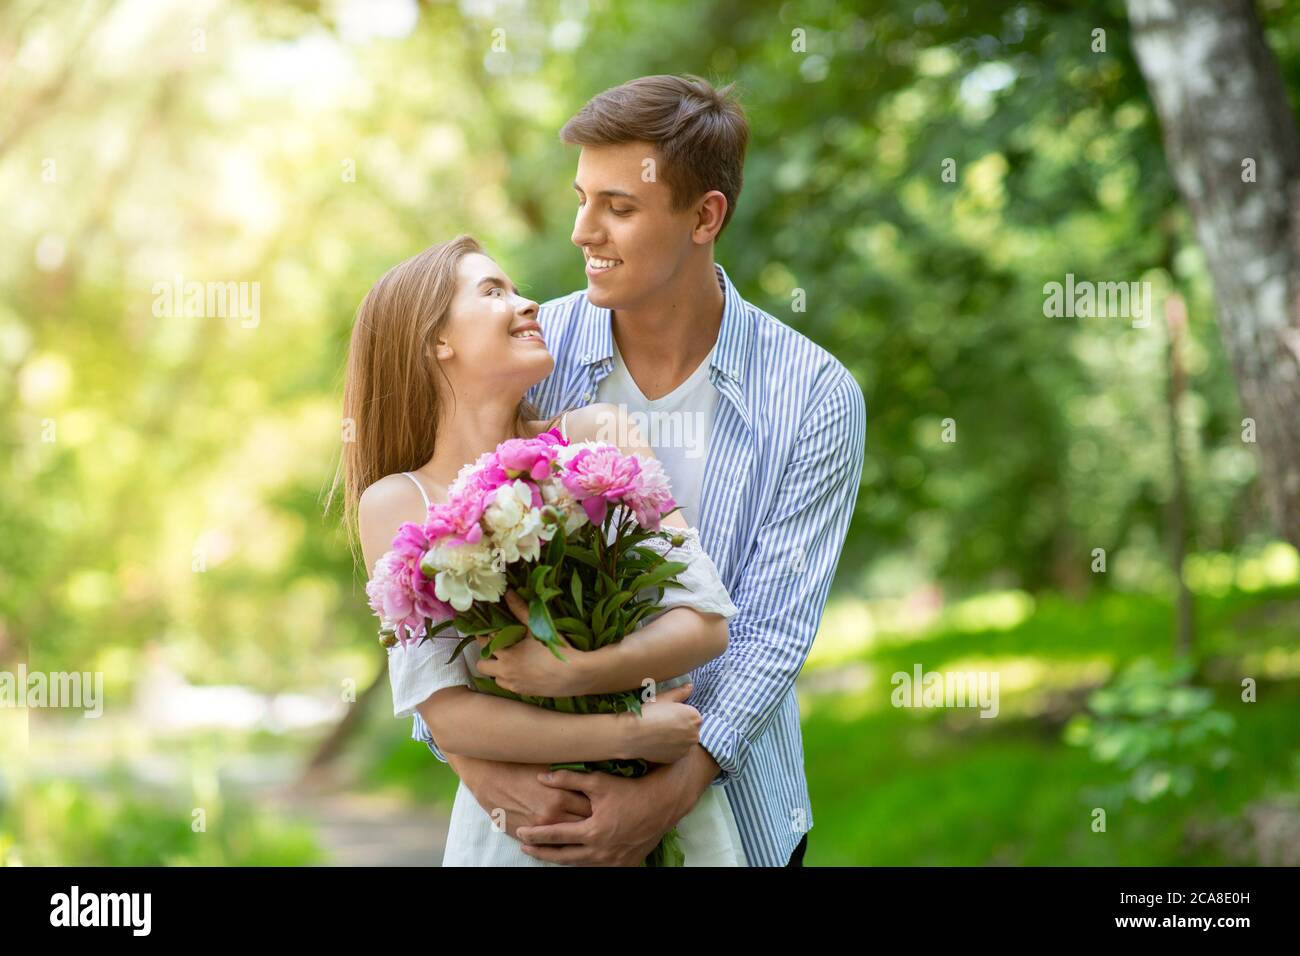 Celebrating anniversary. Young girl with flowers looking affectionately at boyfriend in park Stock Photo